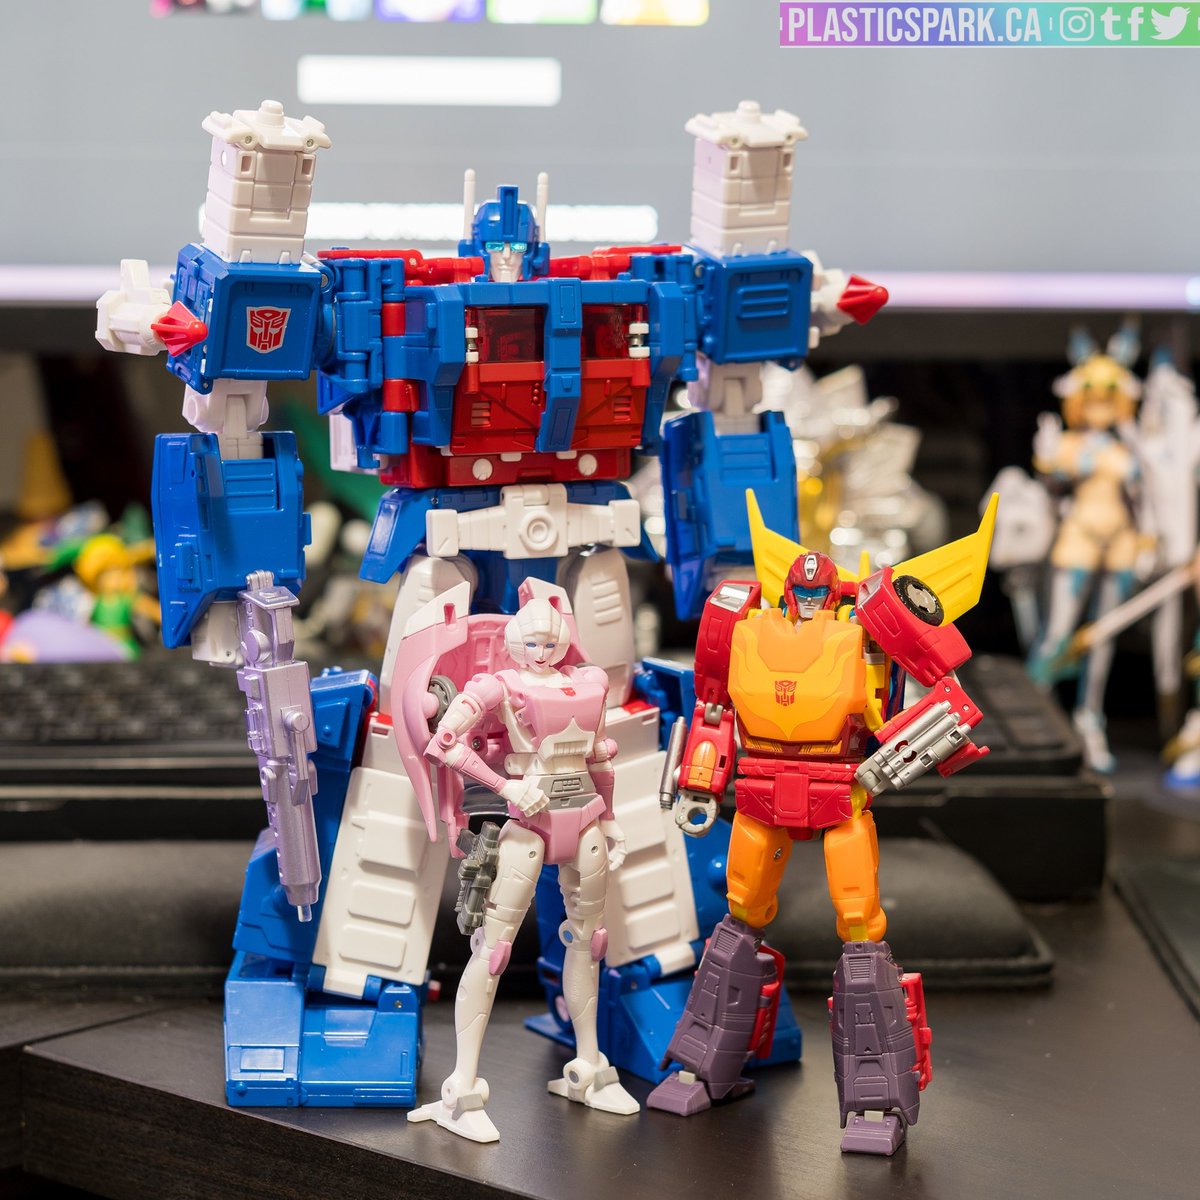 A little #deskbot action on the homefront today. 

📸 Transformers: Studio Series '86 - Ultra Magnus, Arcee, and Hot Rod 

#transformers #toyphotography